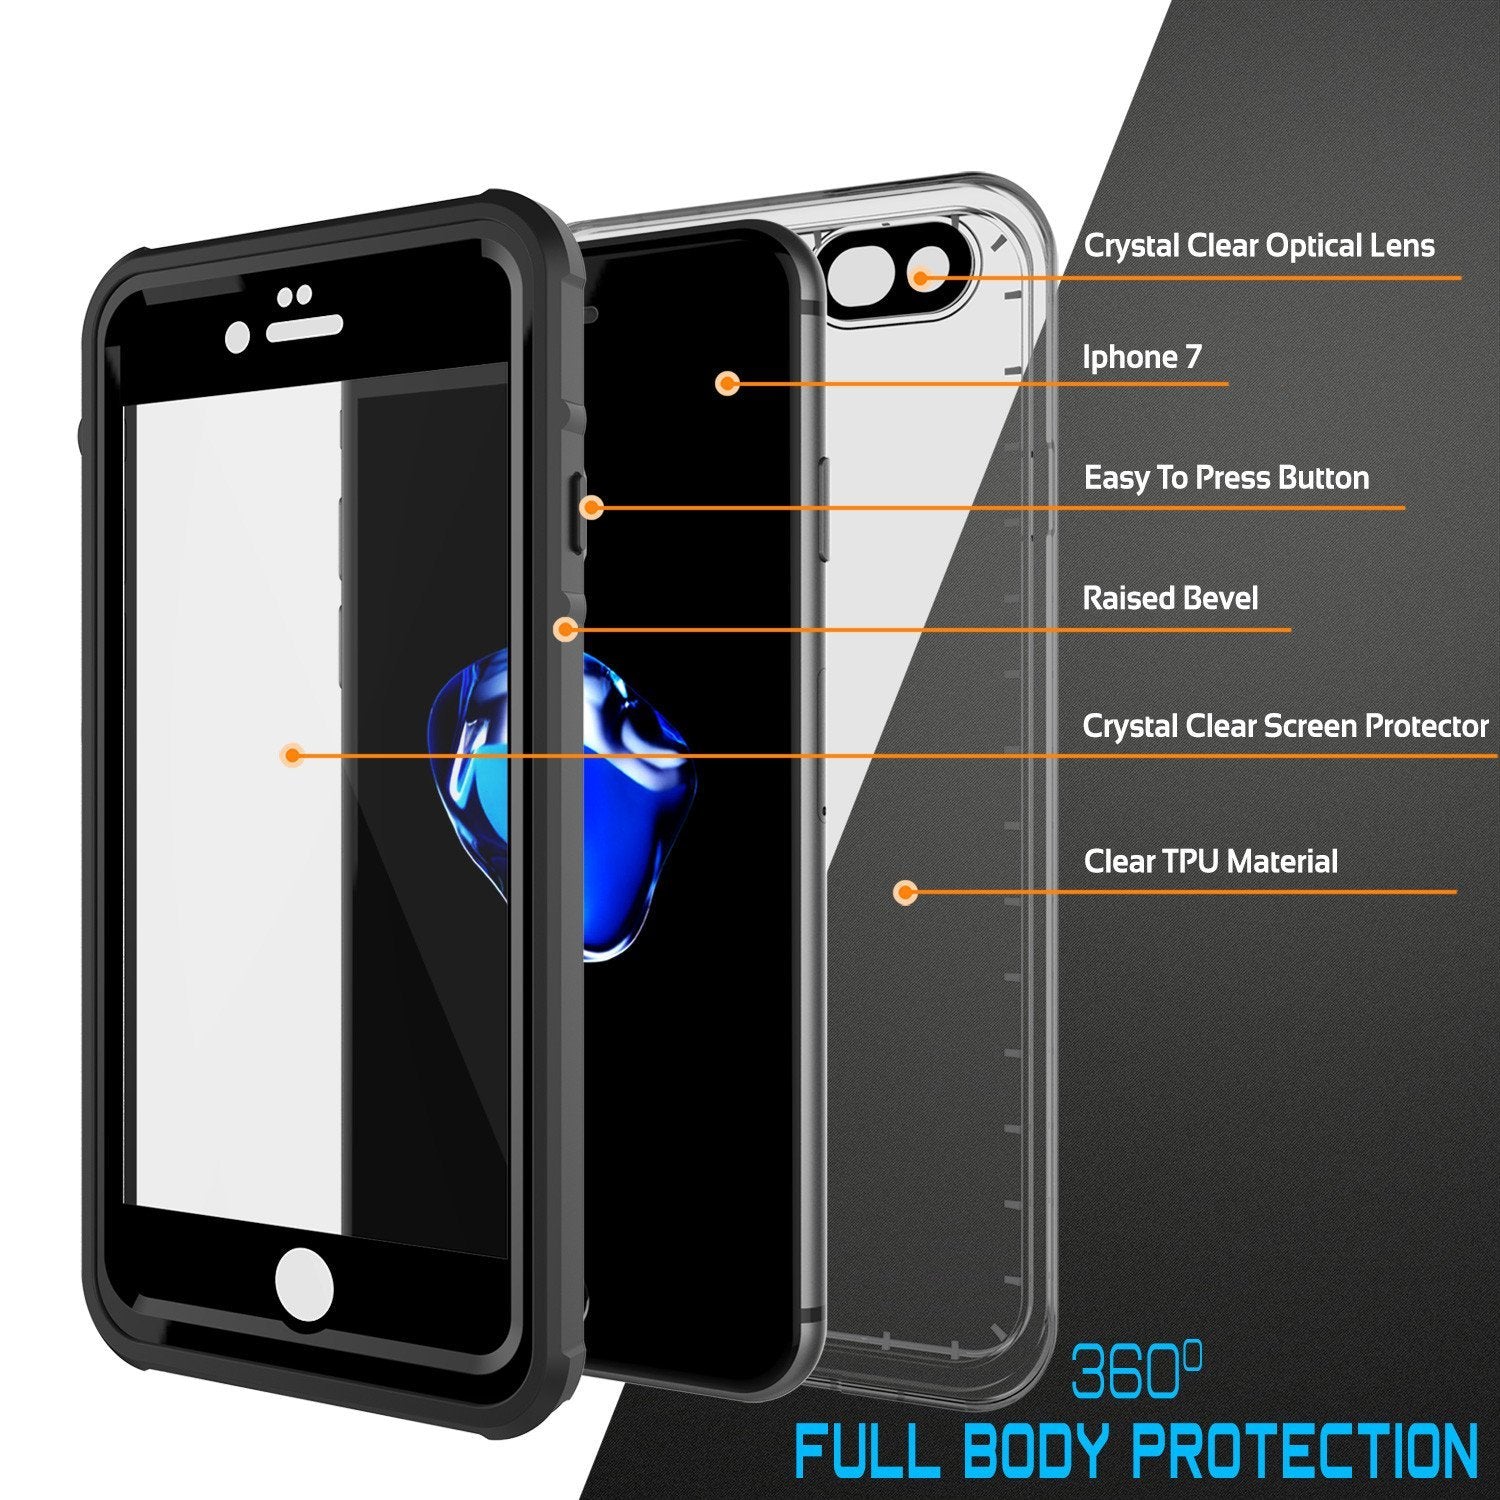 Apple iPhone 8 Waterproof Case, PUNKcase CRYSTAL Black W/ Attached Screen Protector  | Warranty - PunkCase NZ